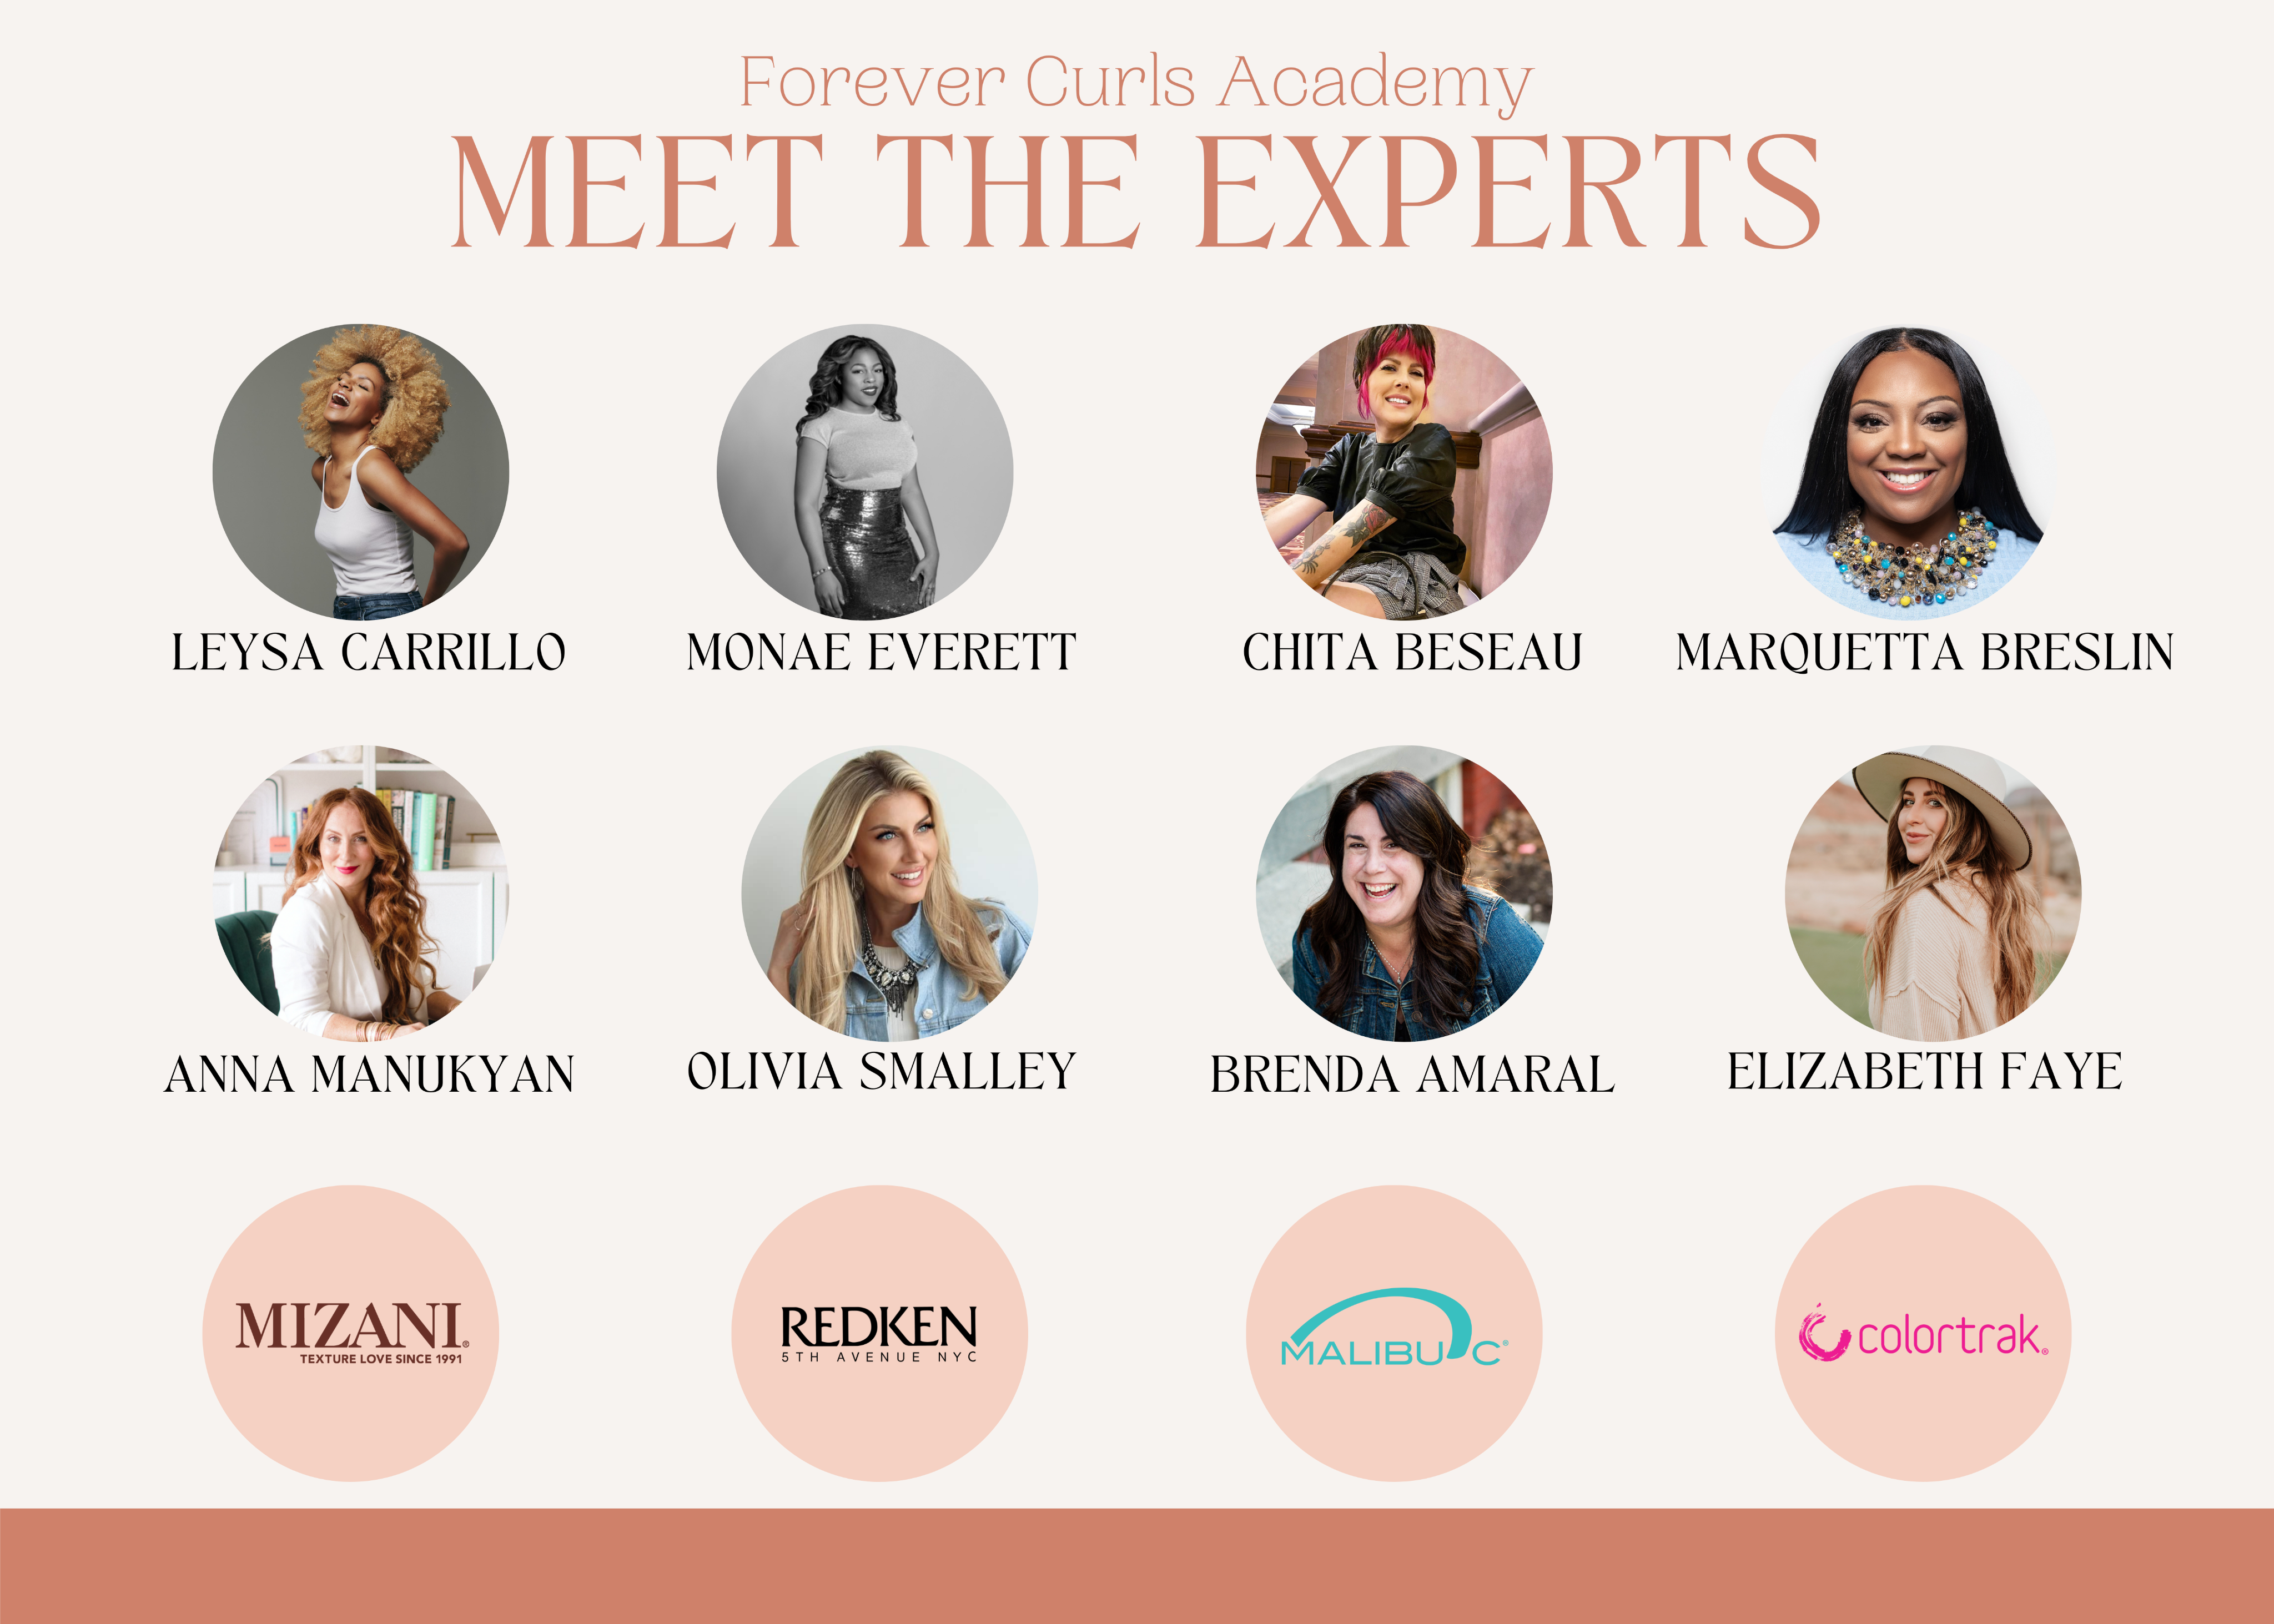 Meet the Experts speaking at the Forever Curls Academy